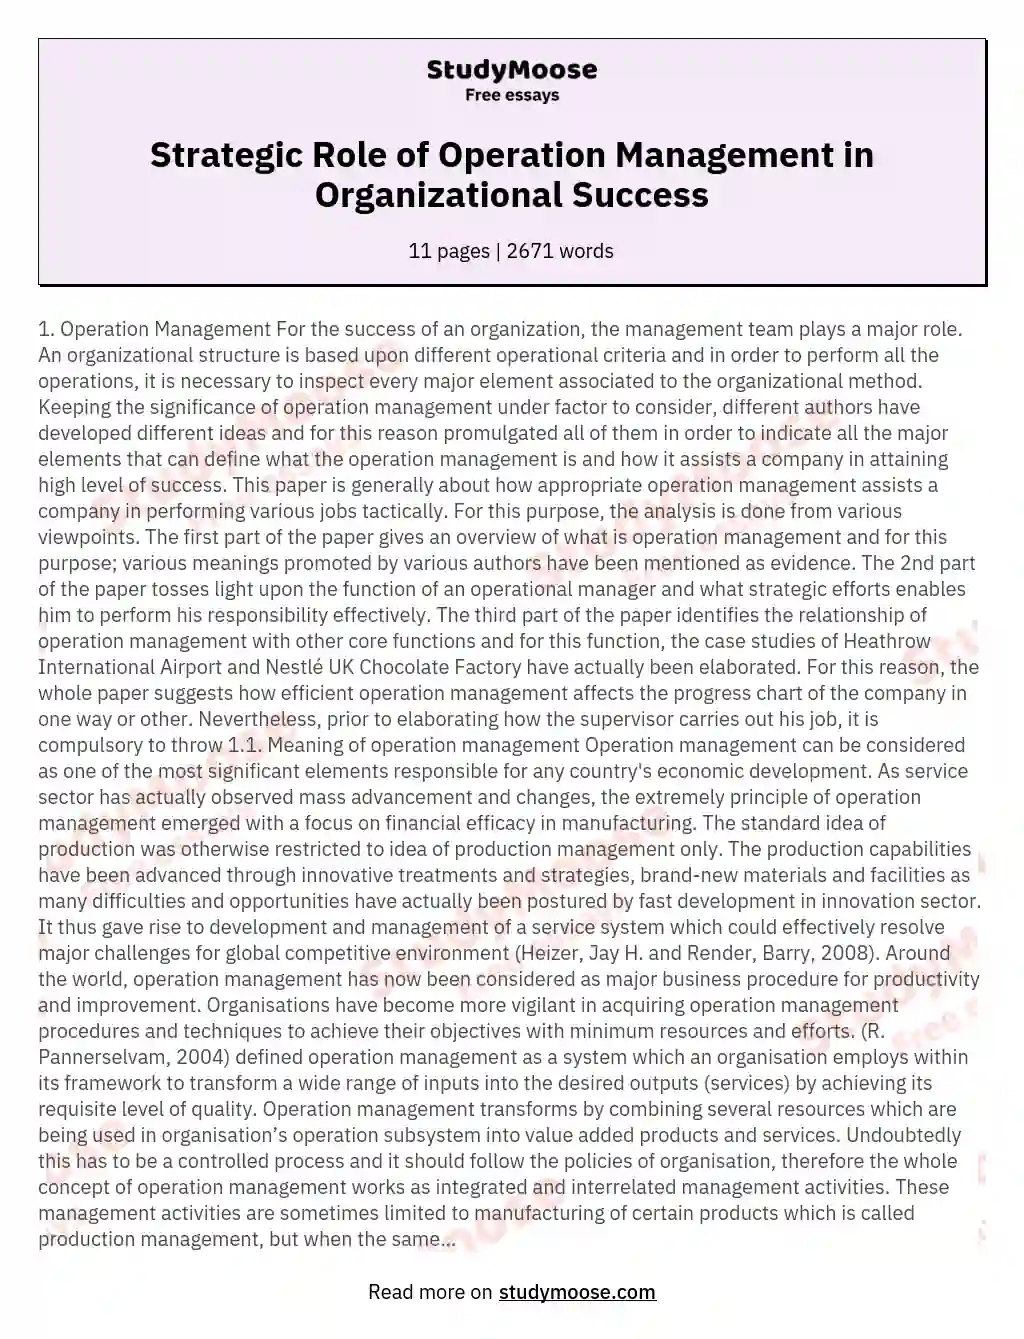 Strategic Role of Operation Management in Organizational Success essay